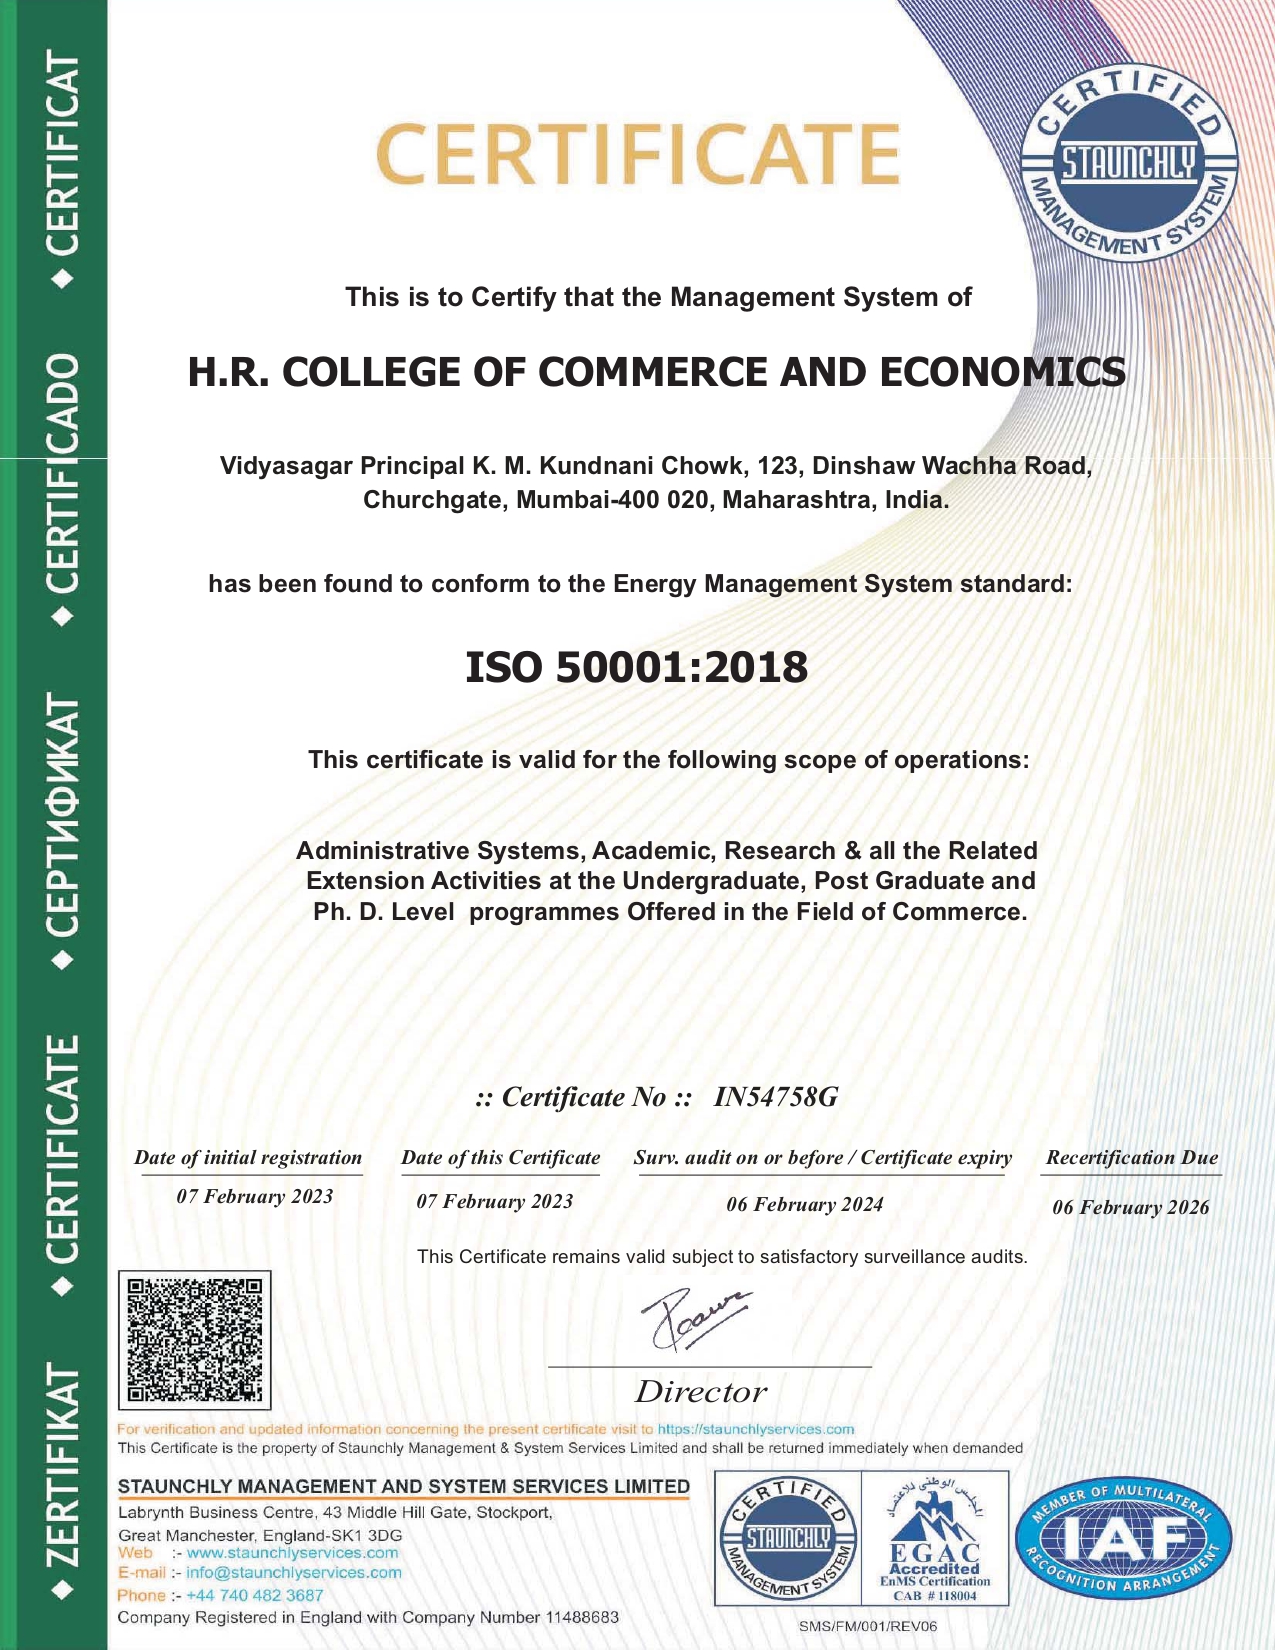 ISO 50001-2018